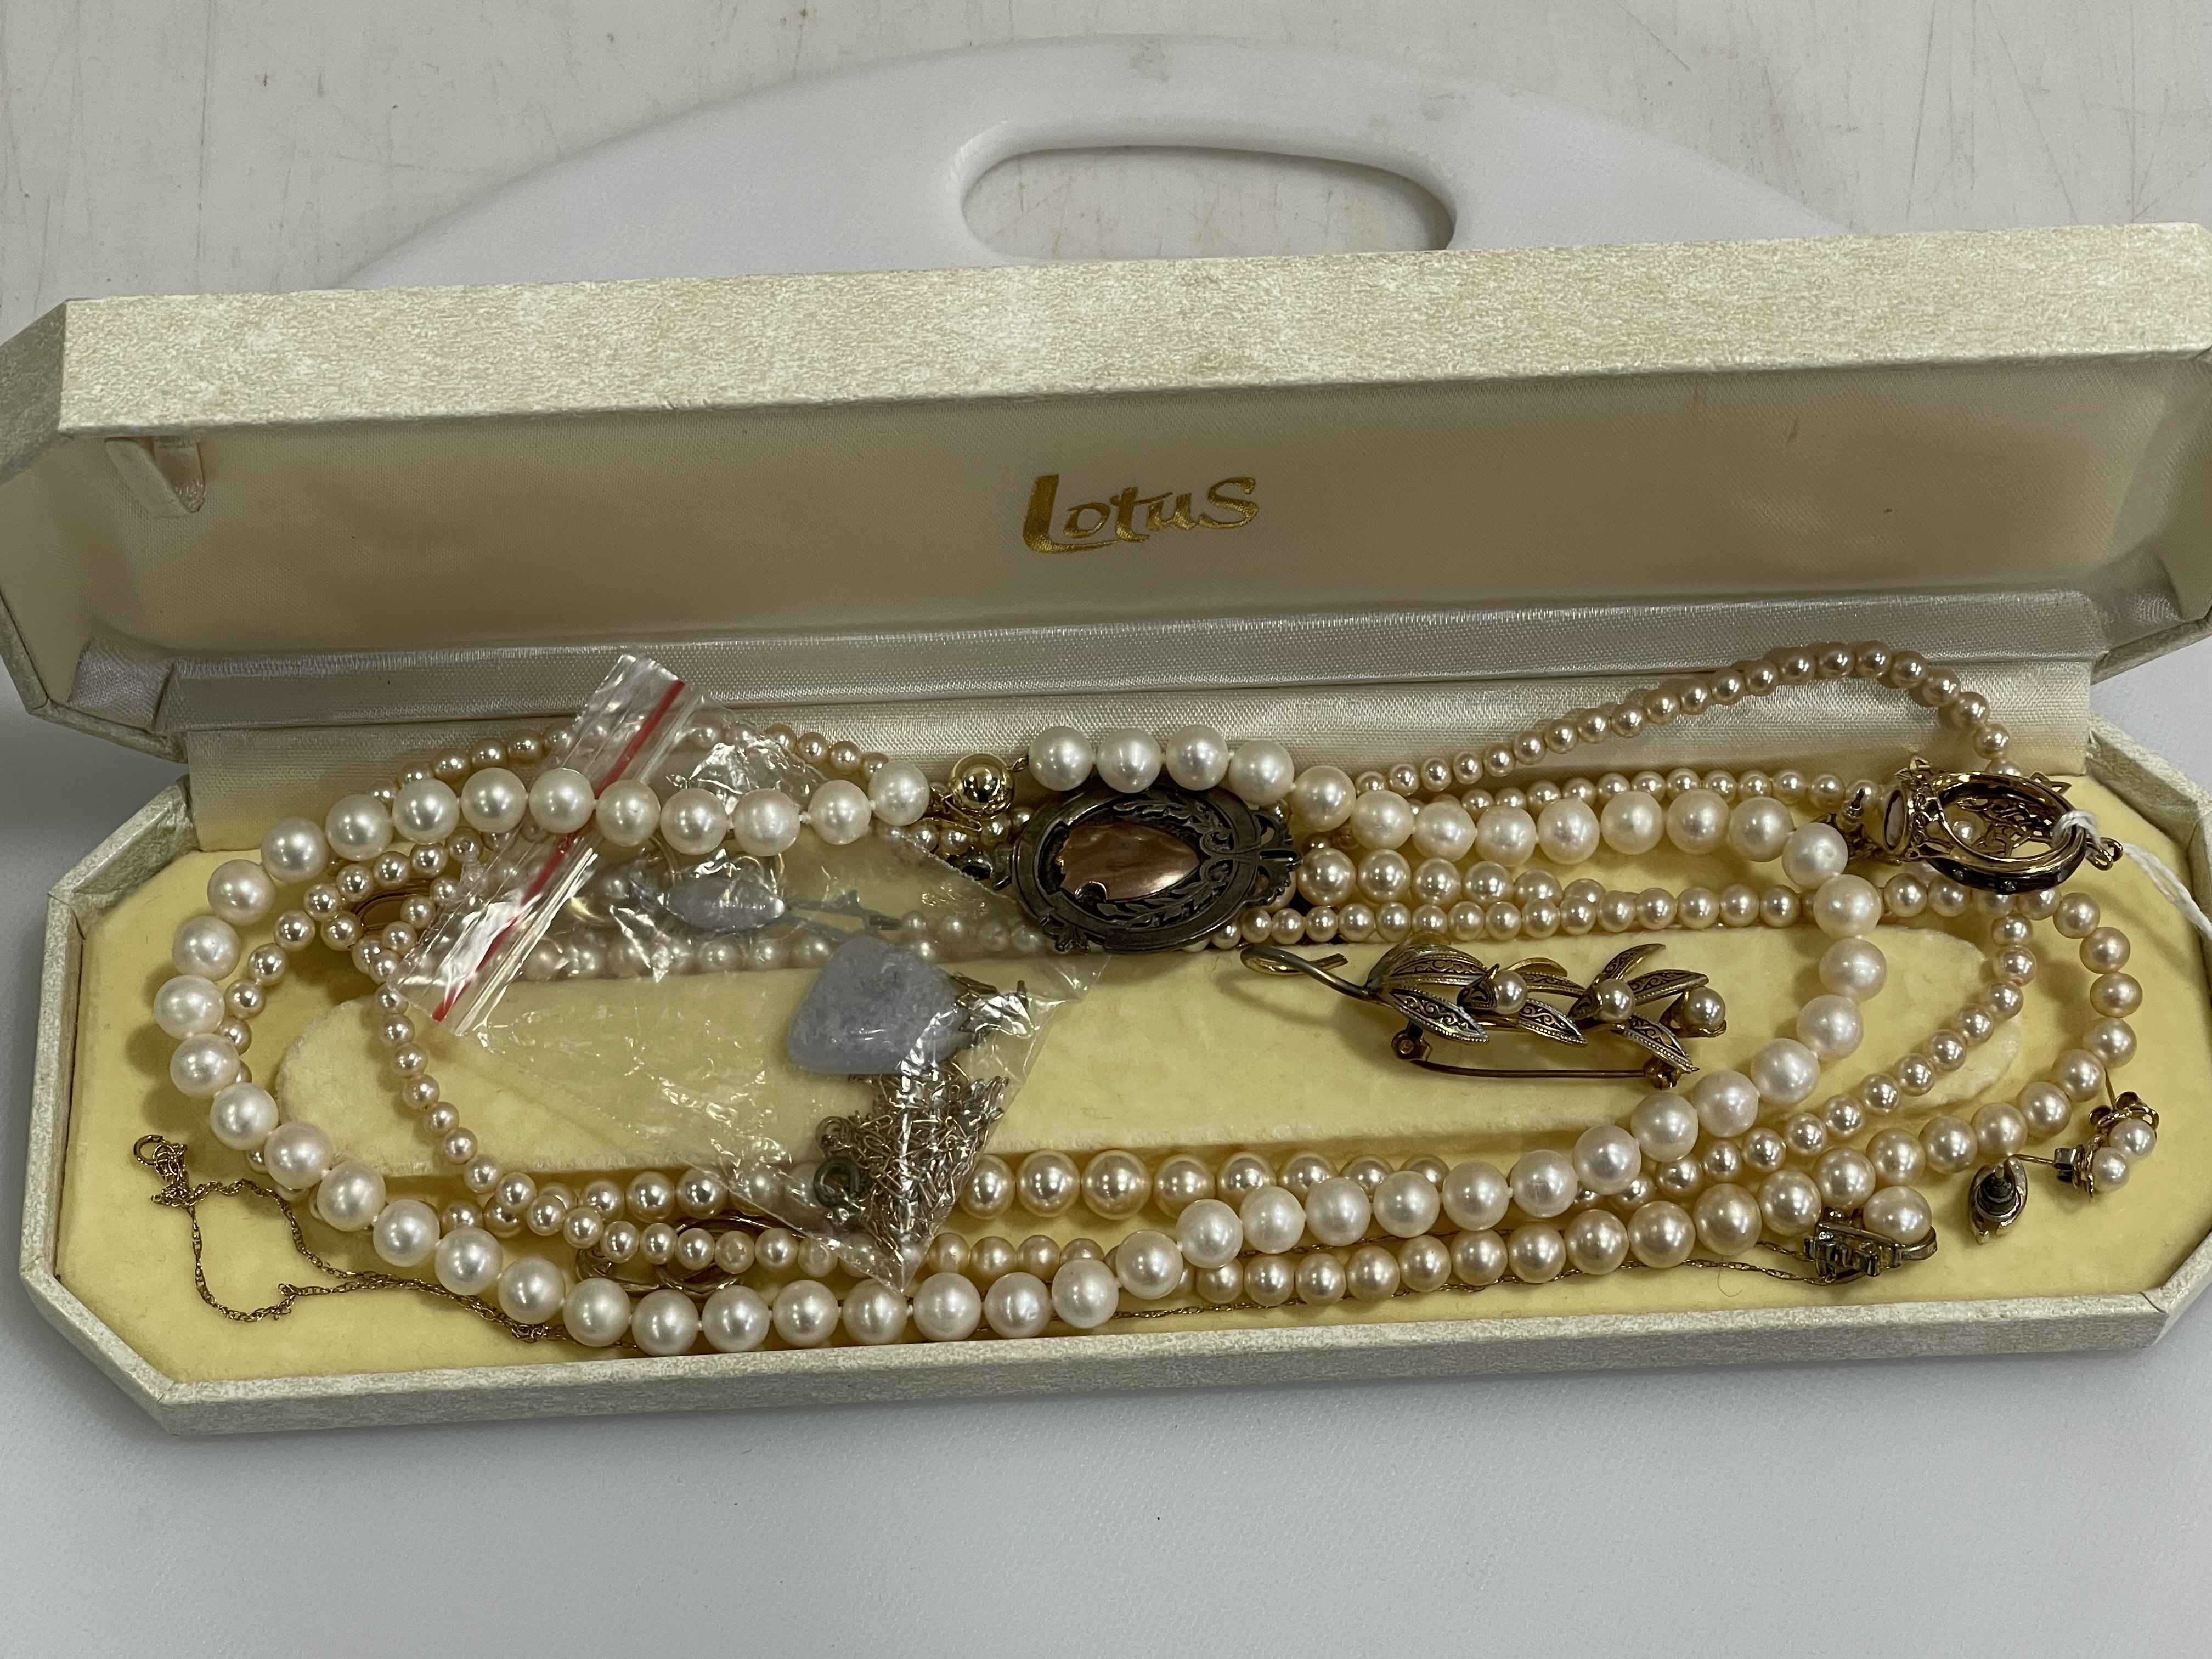 Uniform pearl necklace with 9 carat gold clasp, 40cm length, and other jewellery including gold.